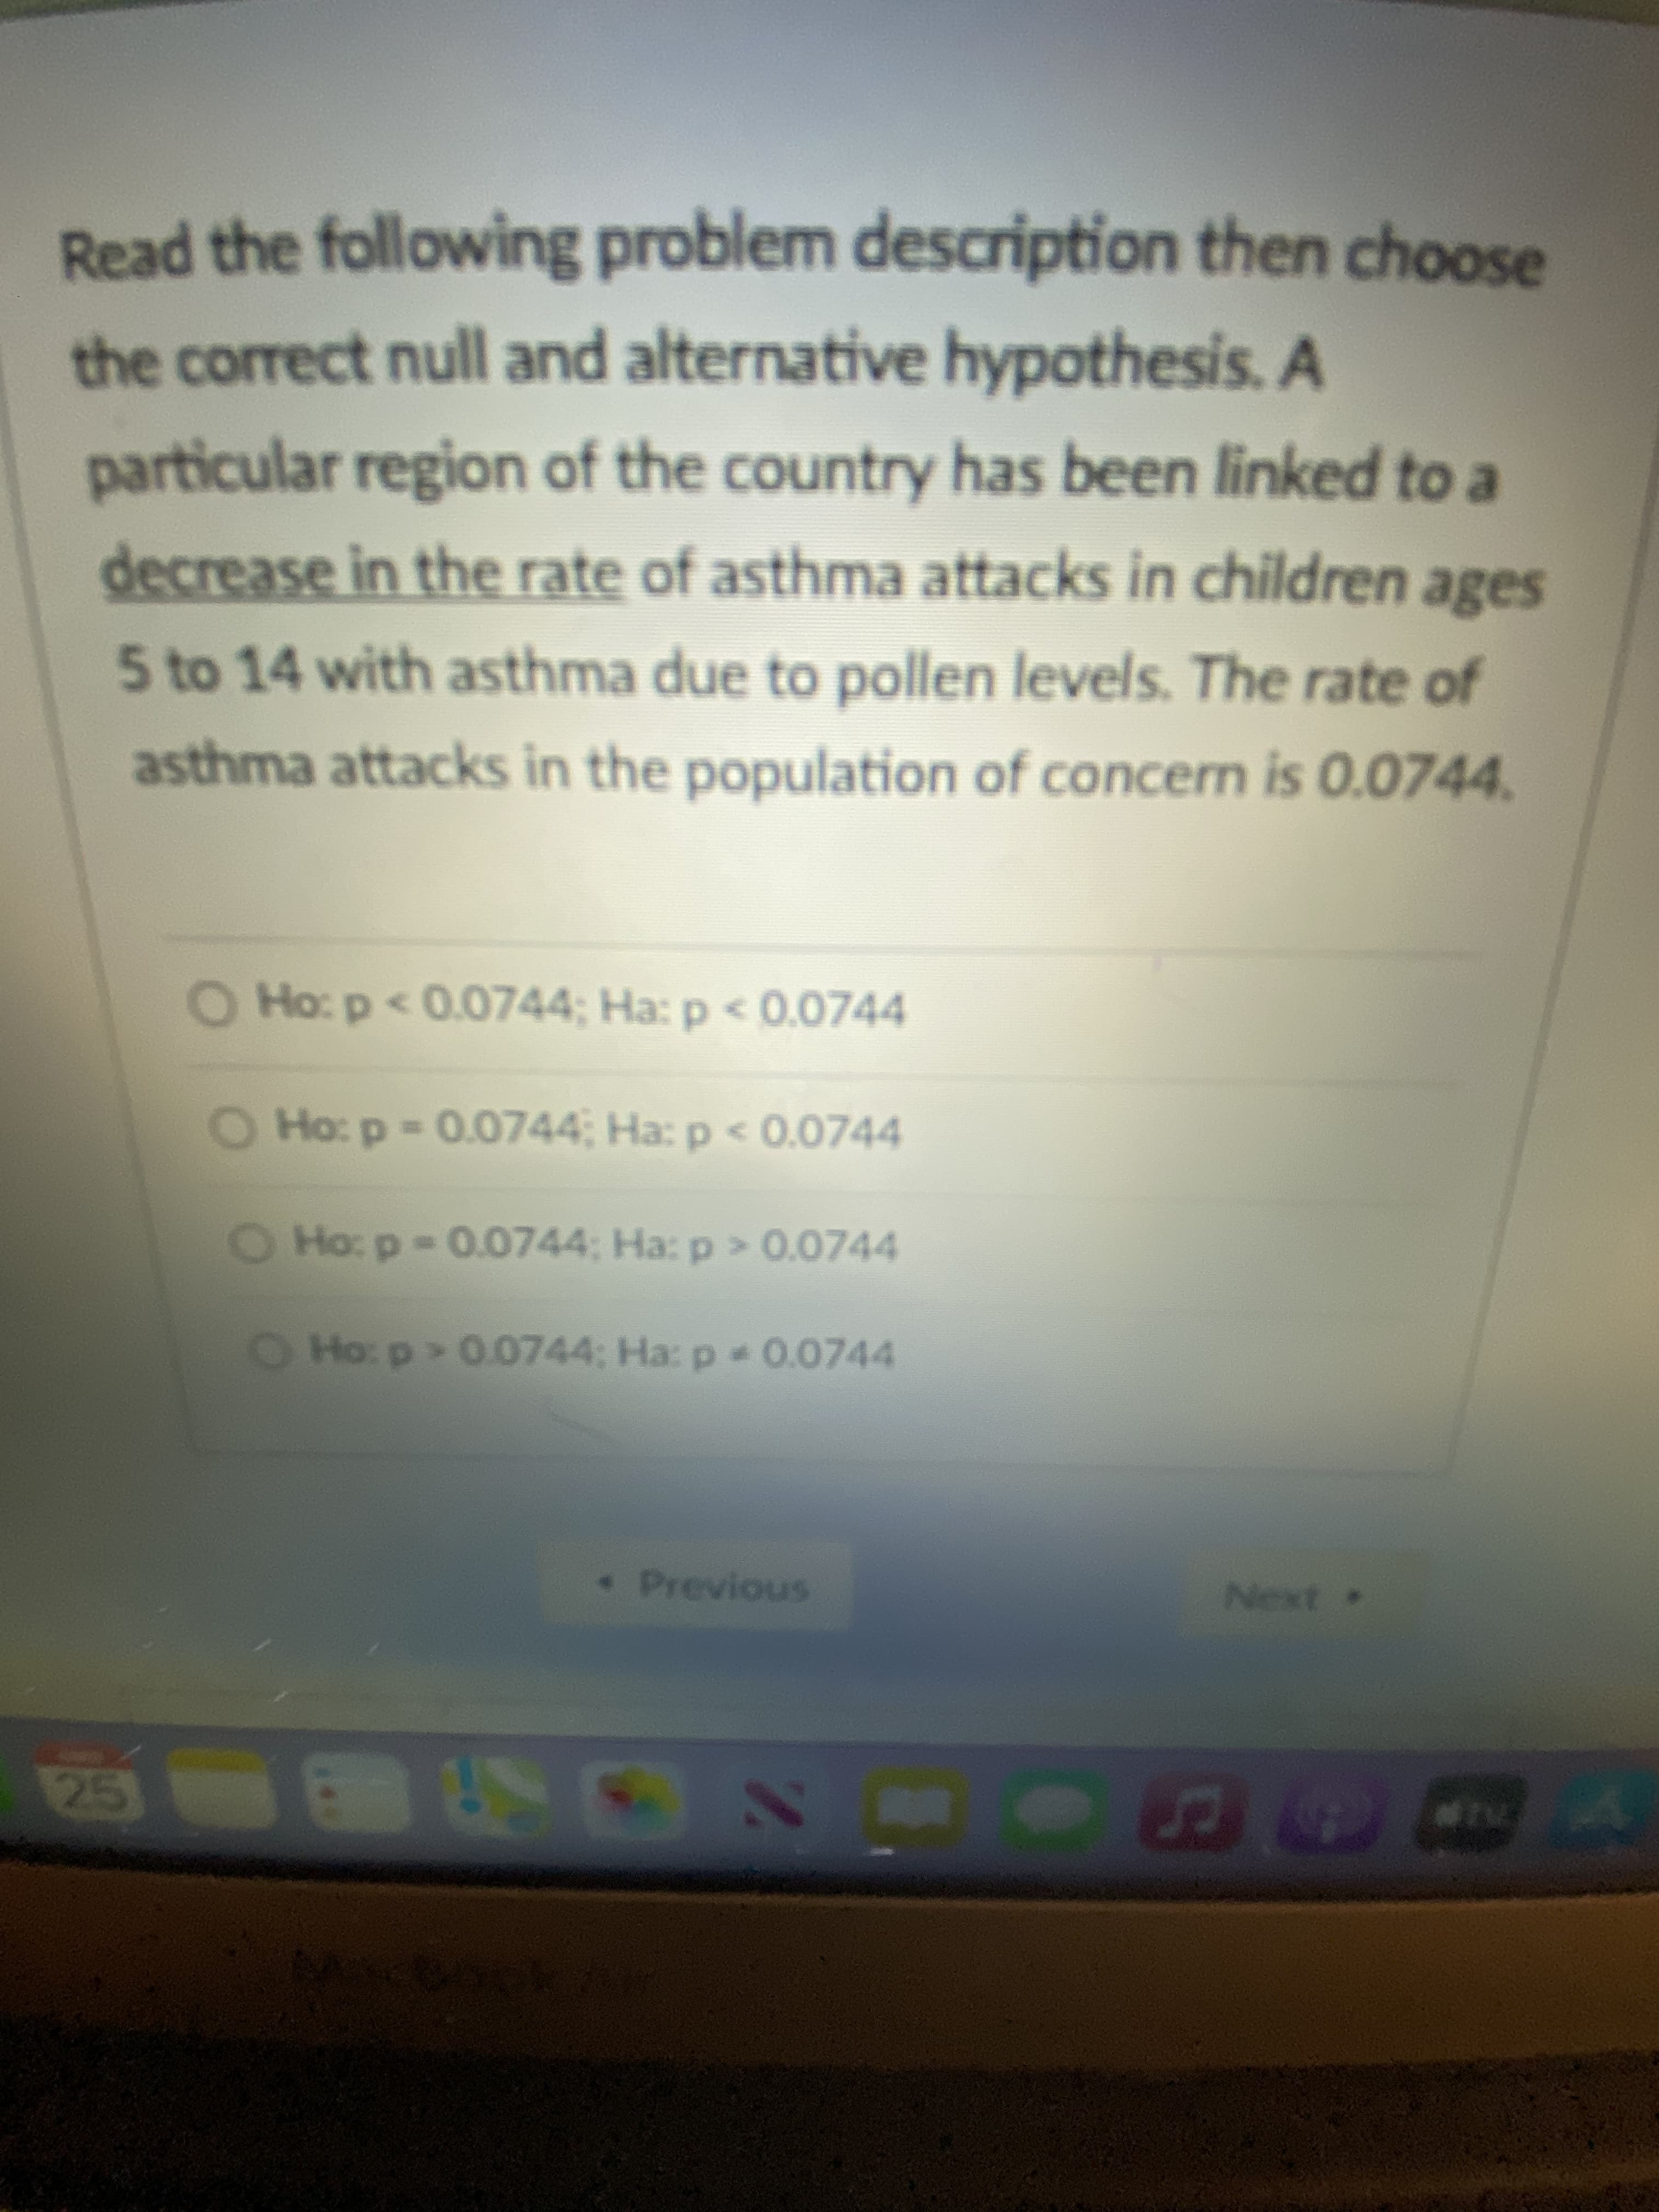 Read the following problem description then choose
the correct null and alternative hypothesis. A
particular region of the country has been linked to a
decrease in the rate of asthma attacks in children ages
5 to 14 with asthma due to pollen levels. The rate of
asthma attacks in the population of concern is 0.0744.
